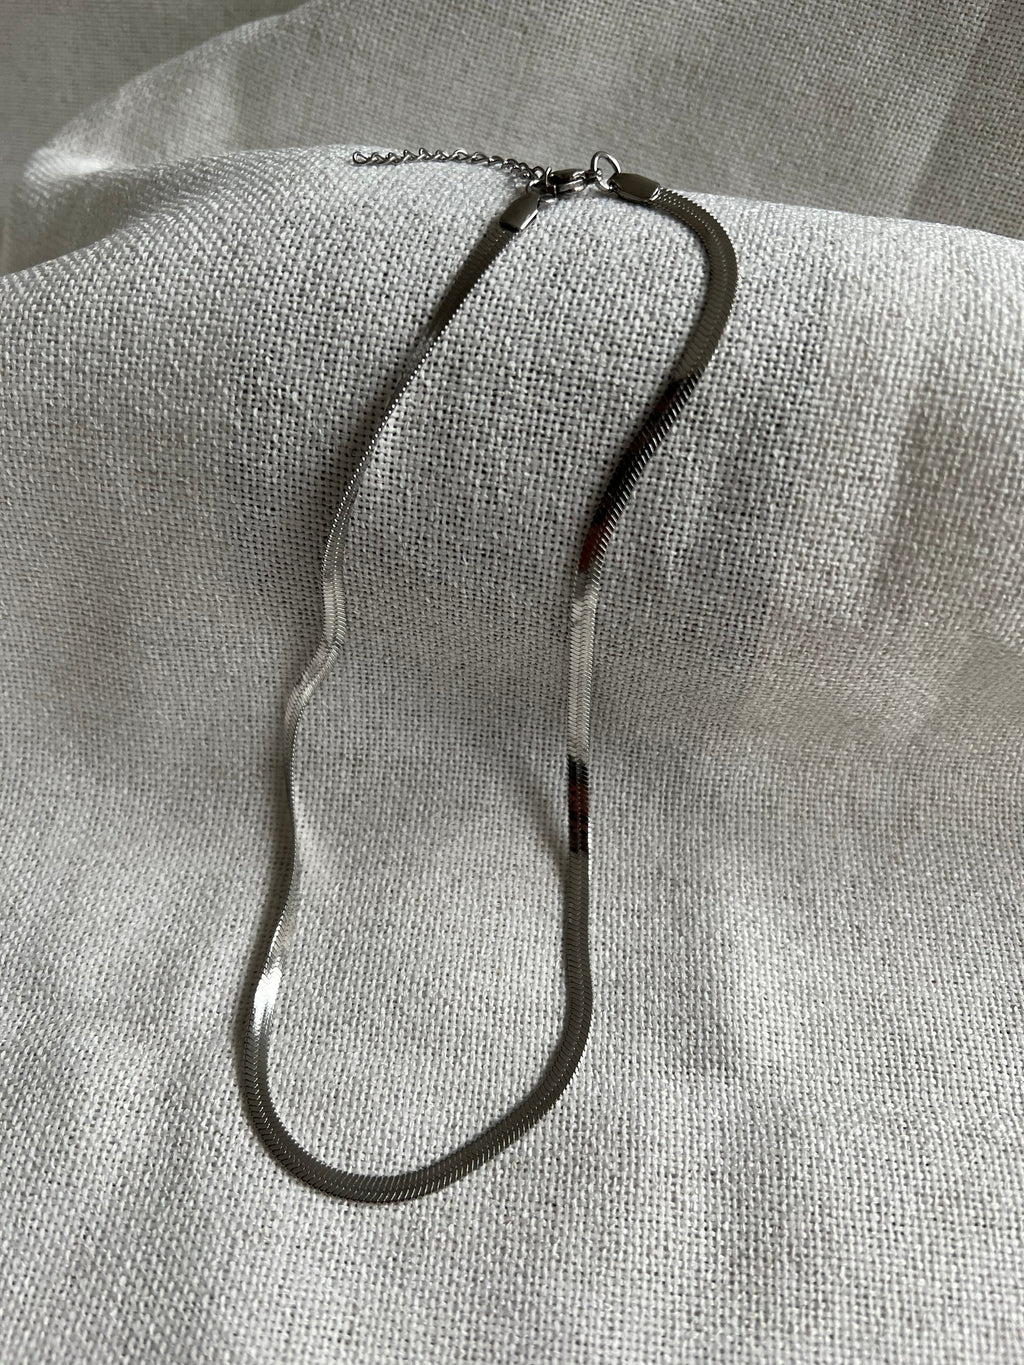 silver snake chain necklace